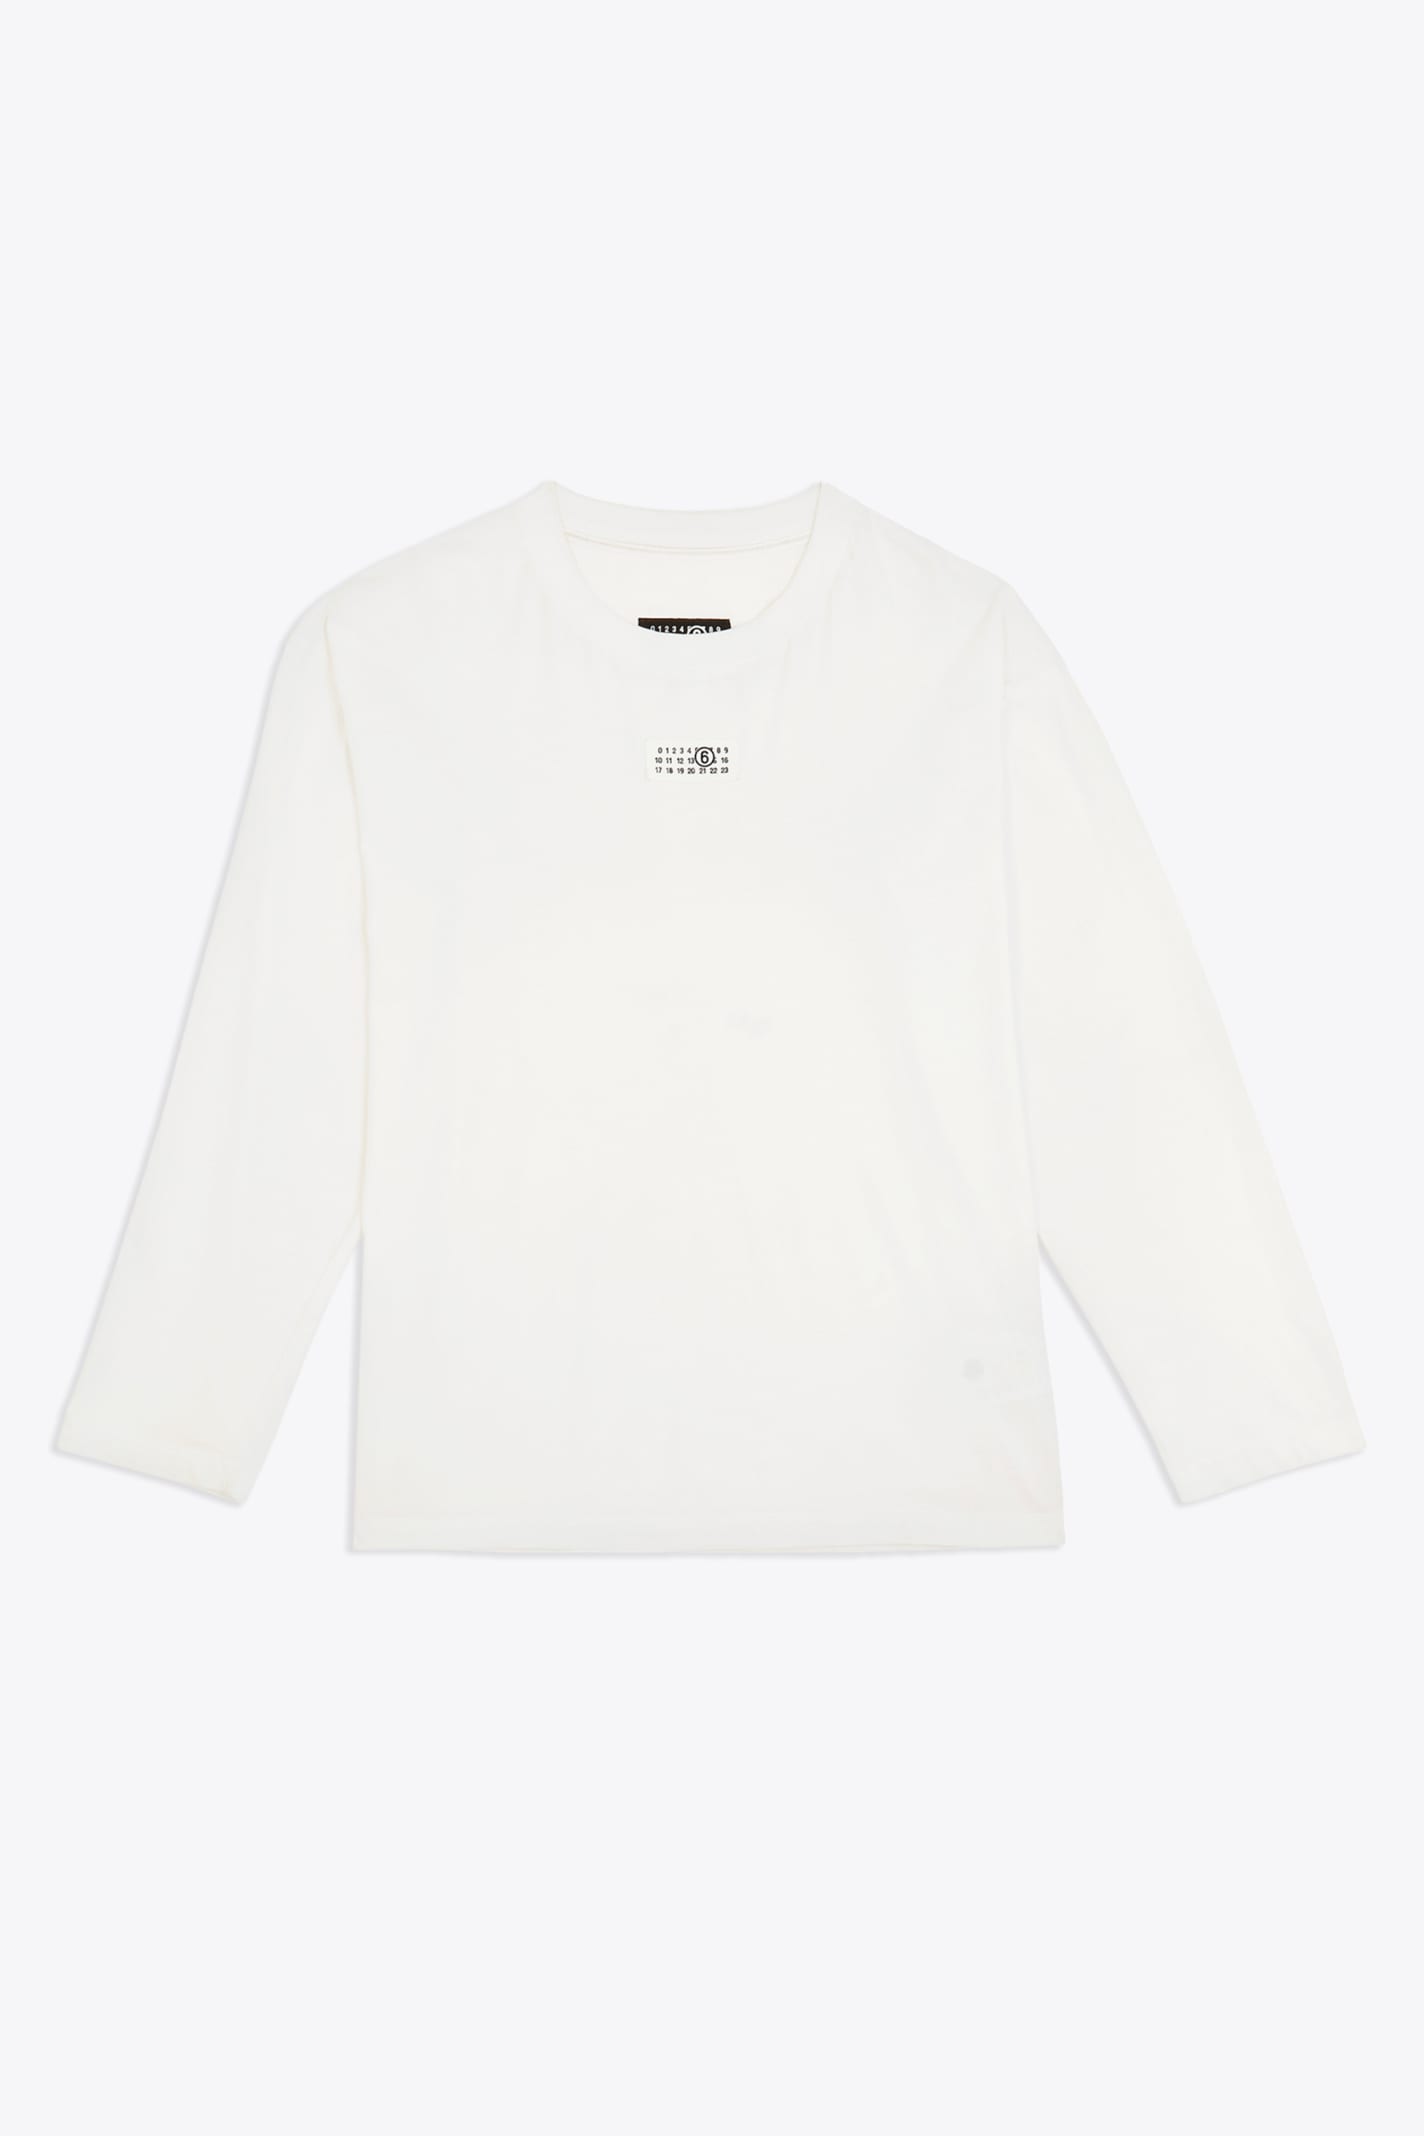 T-shirt White cotton t-shirt with long sleeves and front logo tag